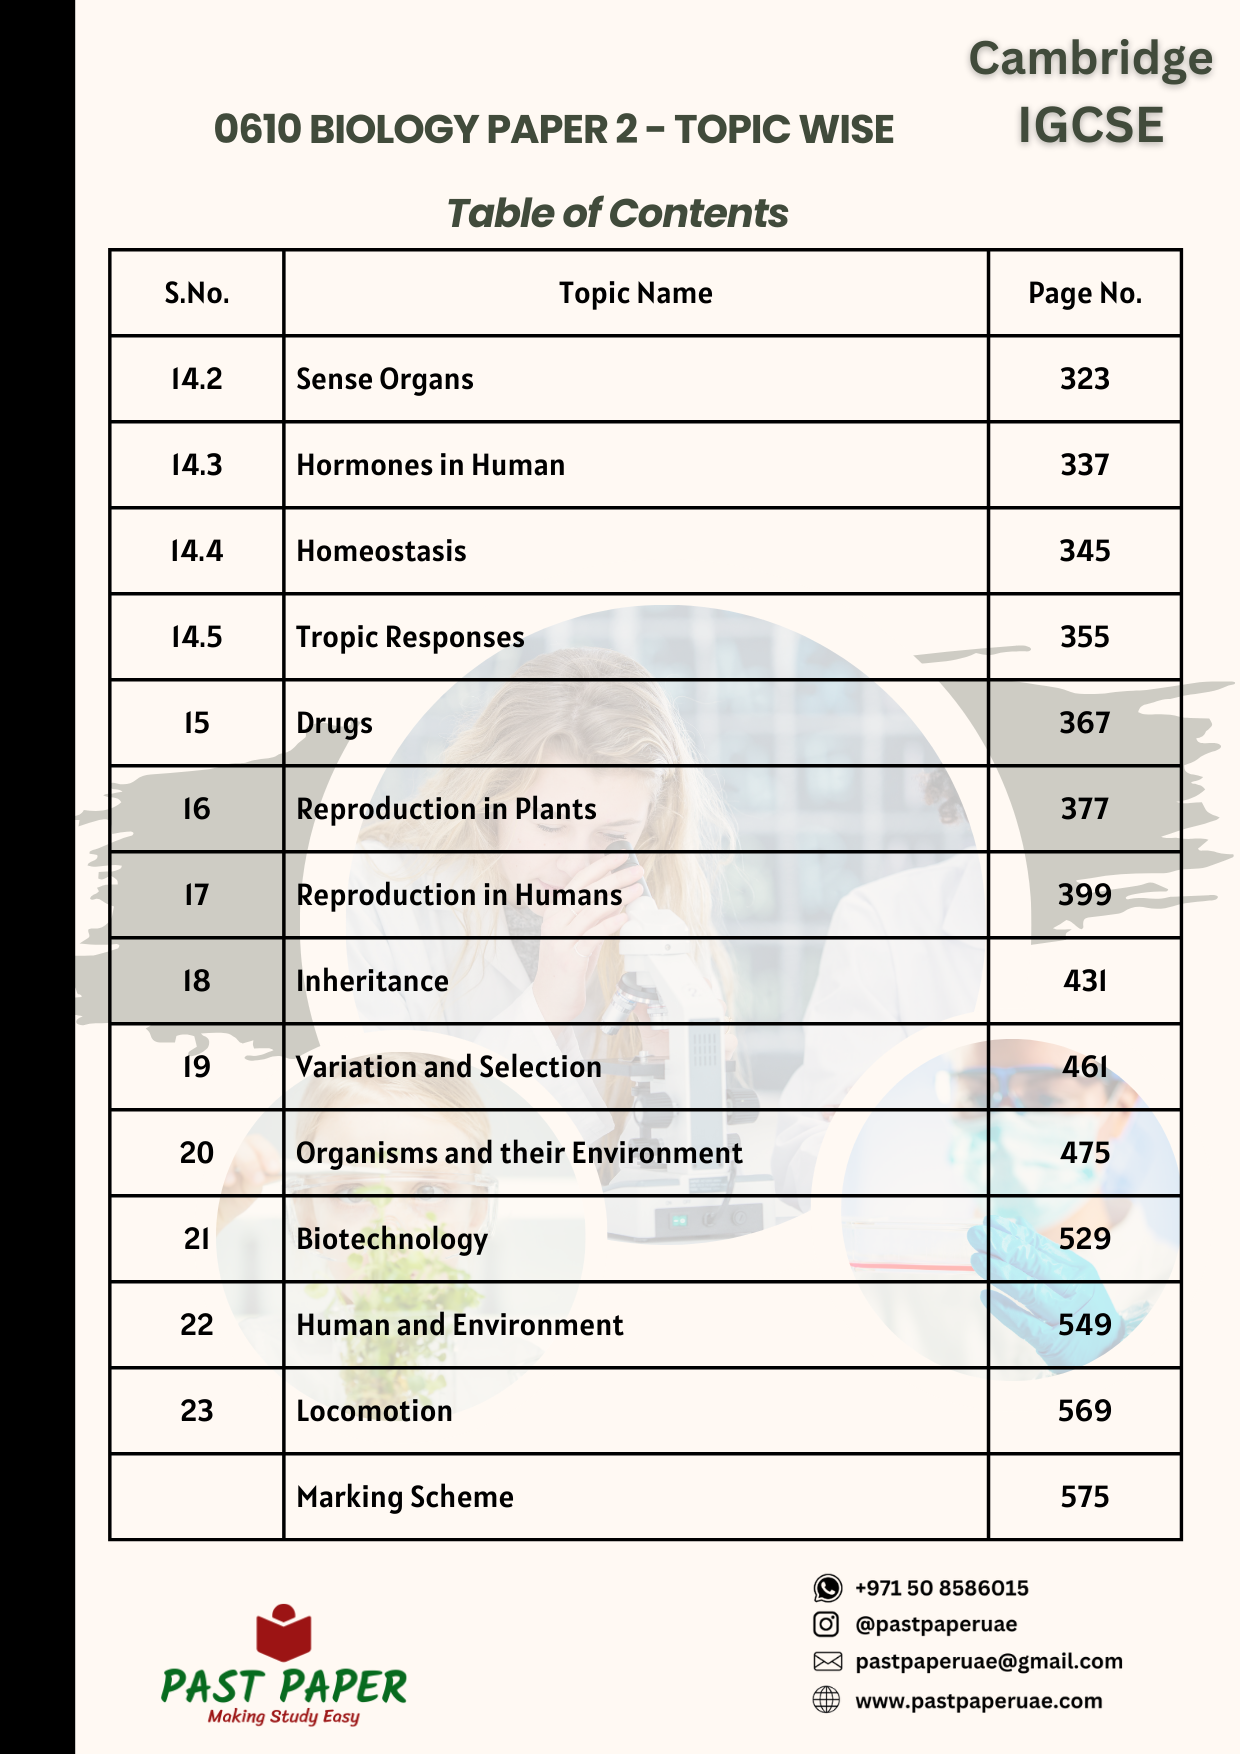 0610 Biology - Paper 2 (MCQ) - Topic Wise